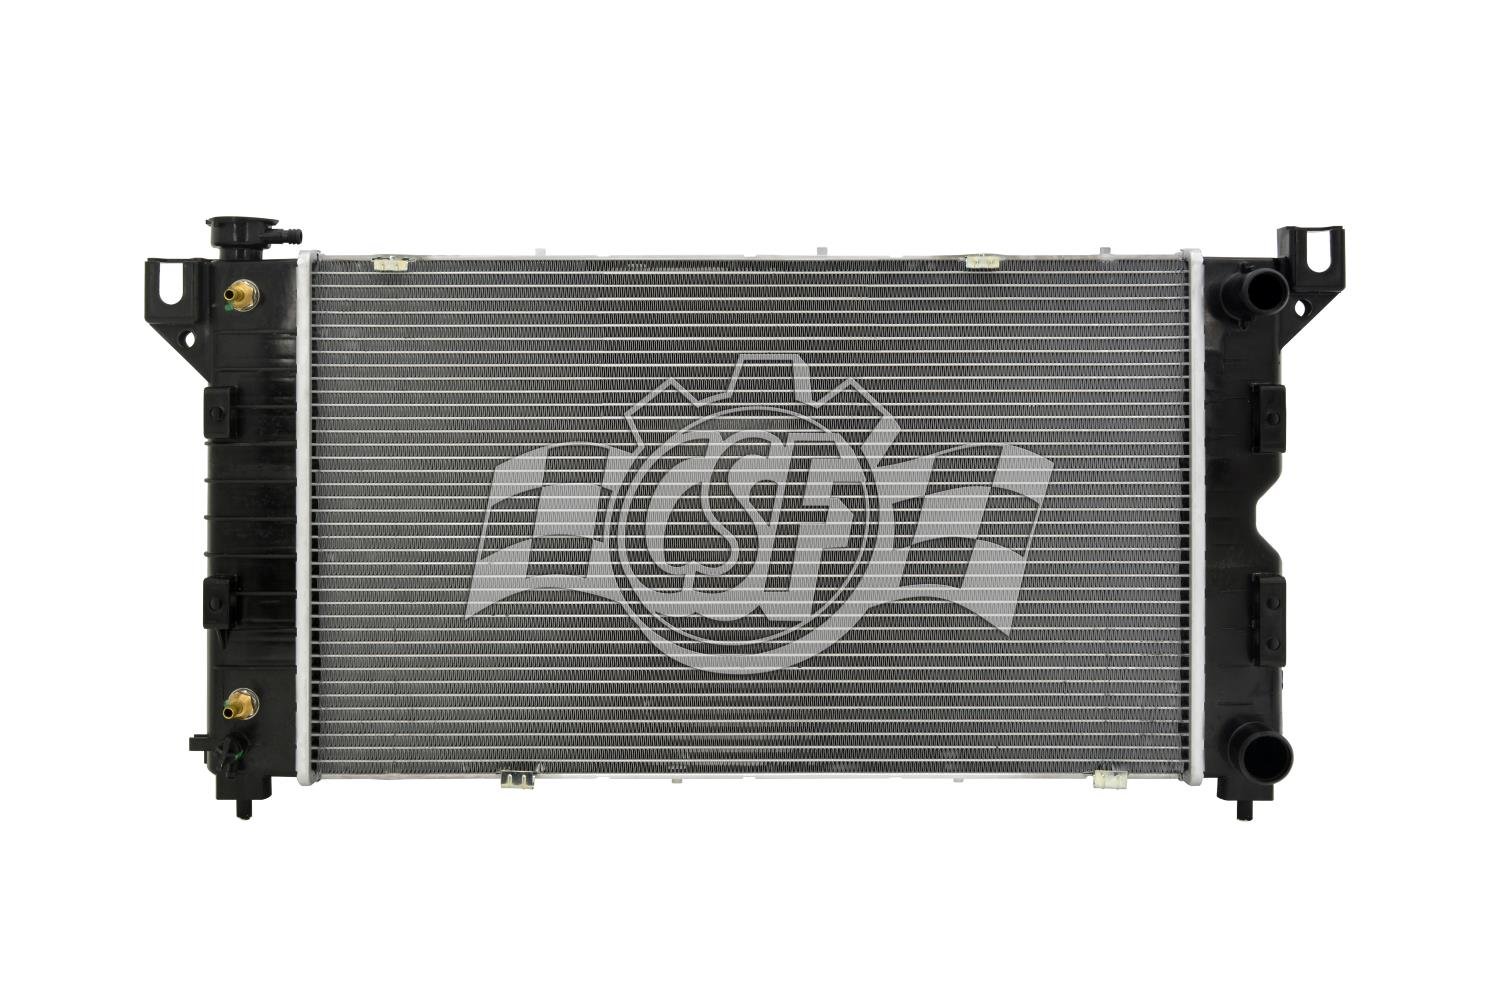 OE-Style 1-Row Radiator, Plymouth Voyager/Grand Voyager, Dodge Caravan/Grand Carava, Chrysler Town & Country